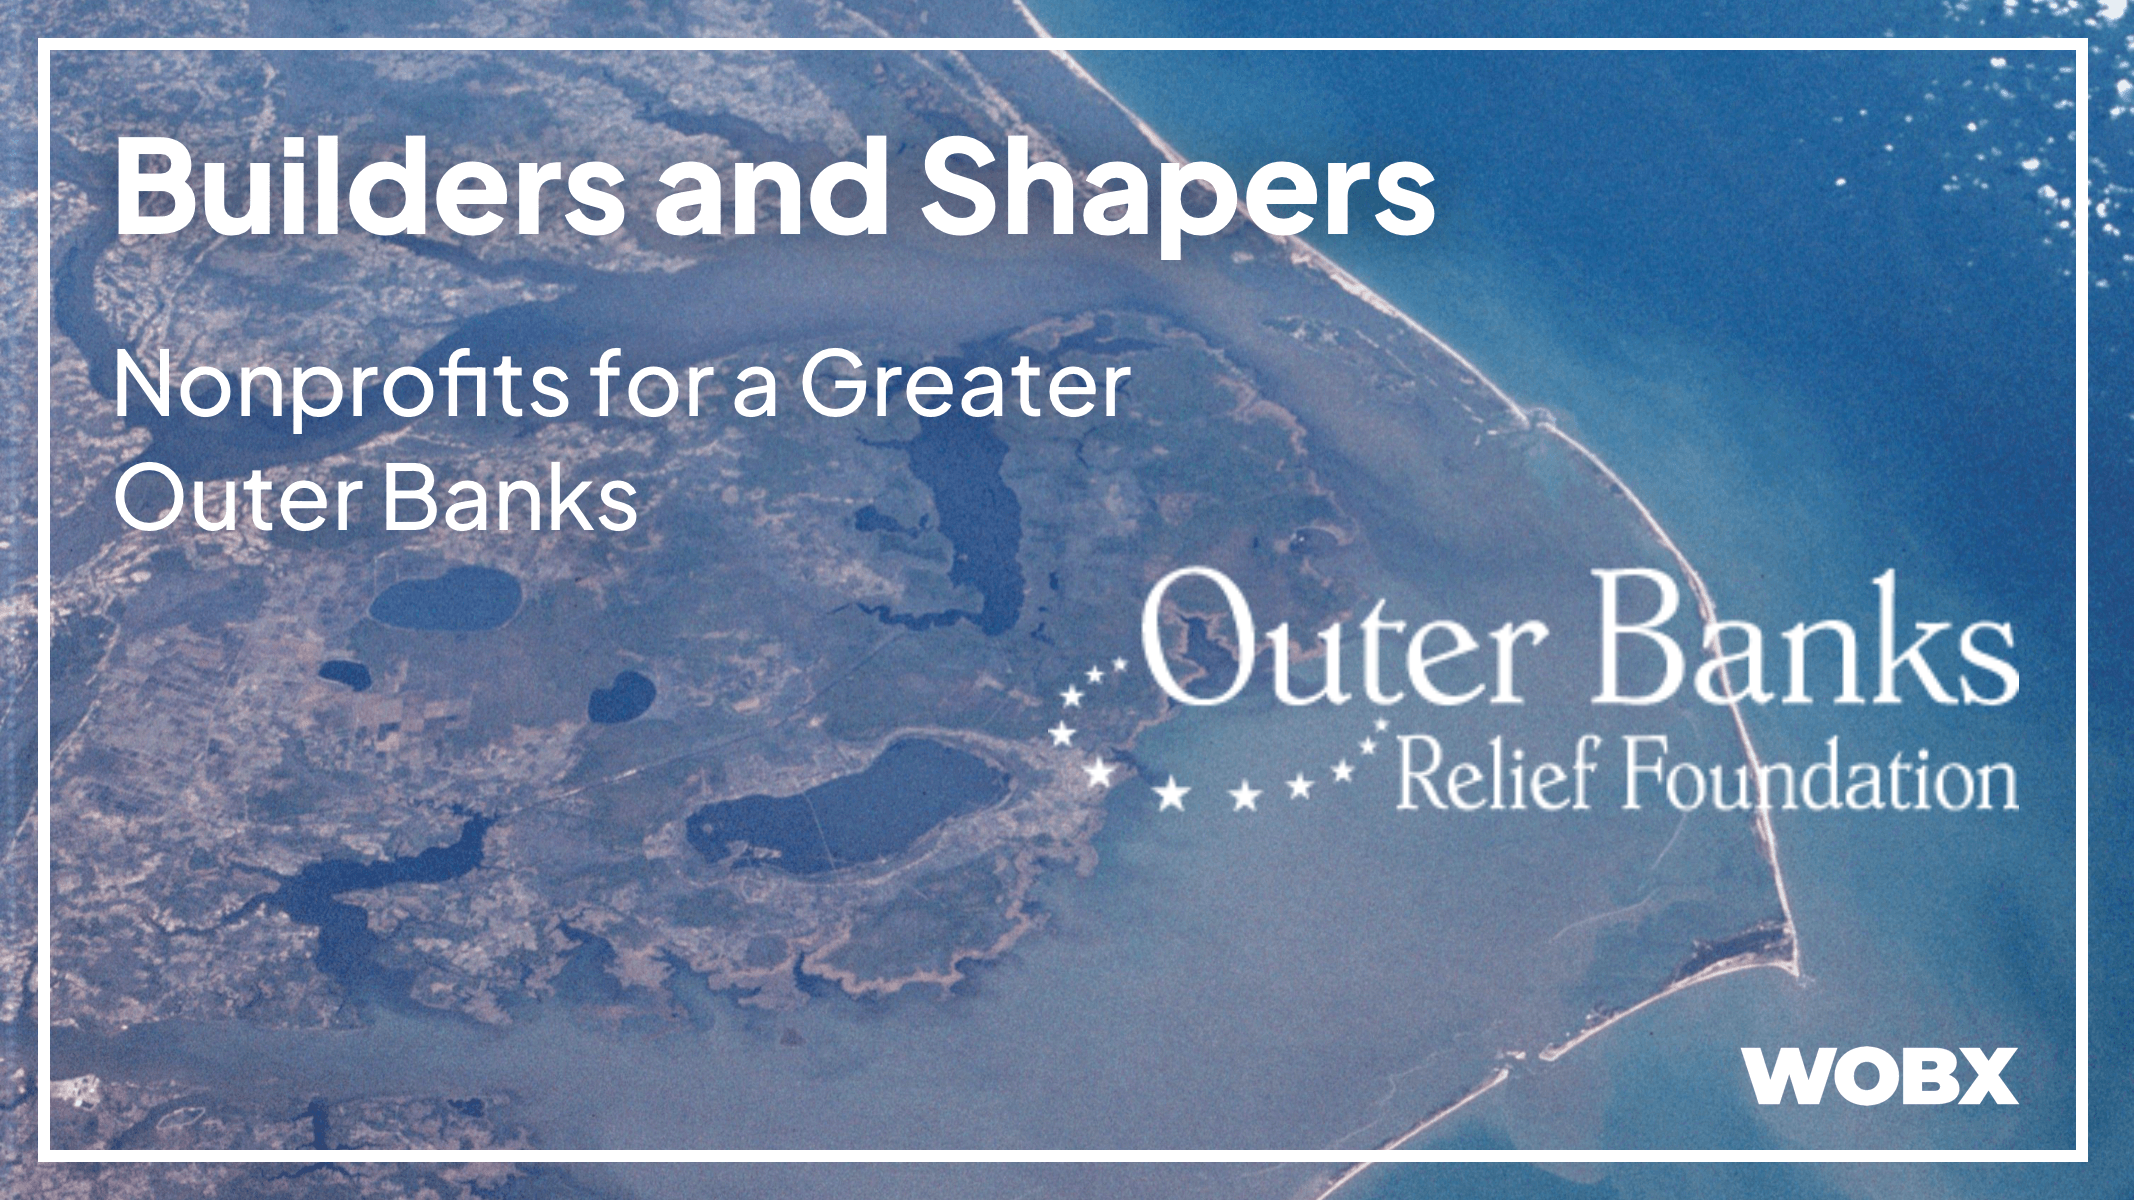 Builders and Shapers: Outer Banks Relief Foundation